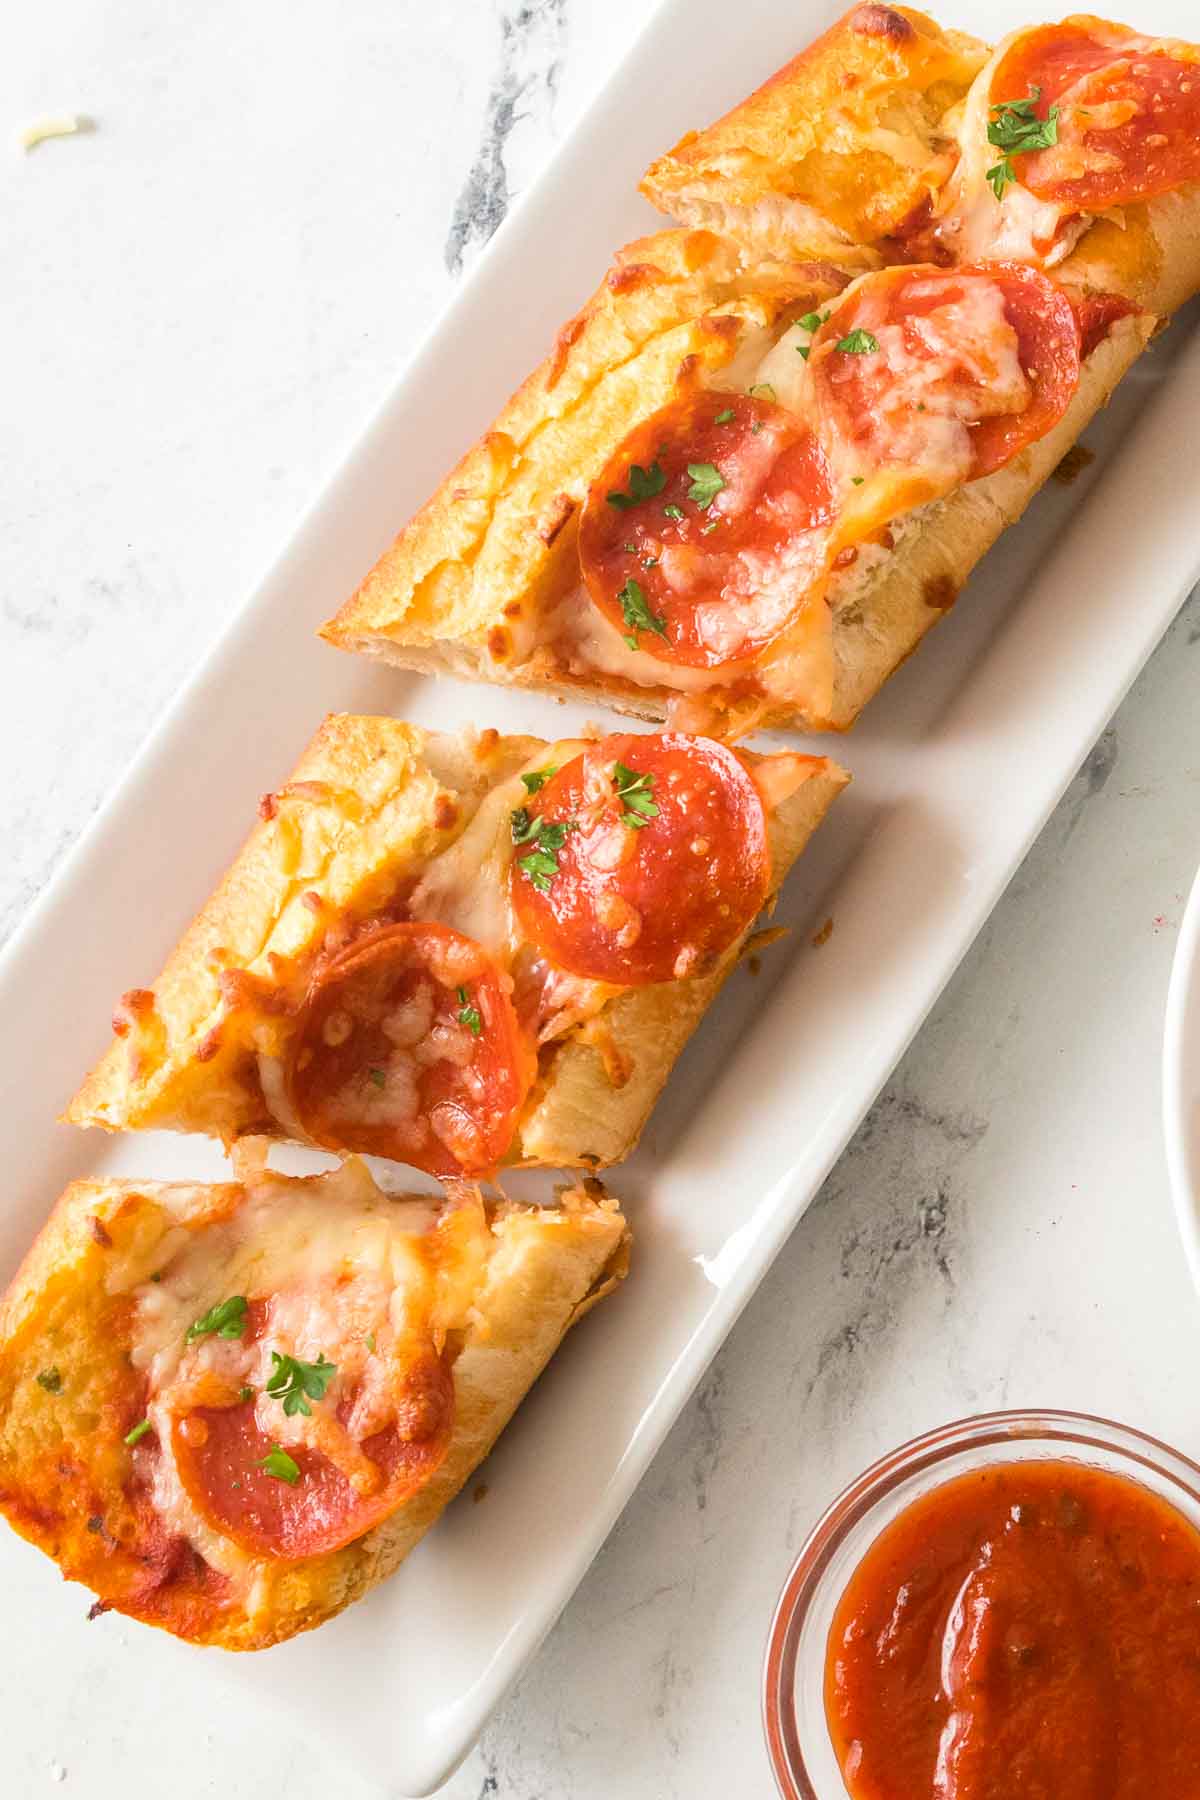 Garlic bread pizza sliced on a plate with marinara sauce on the side